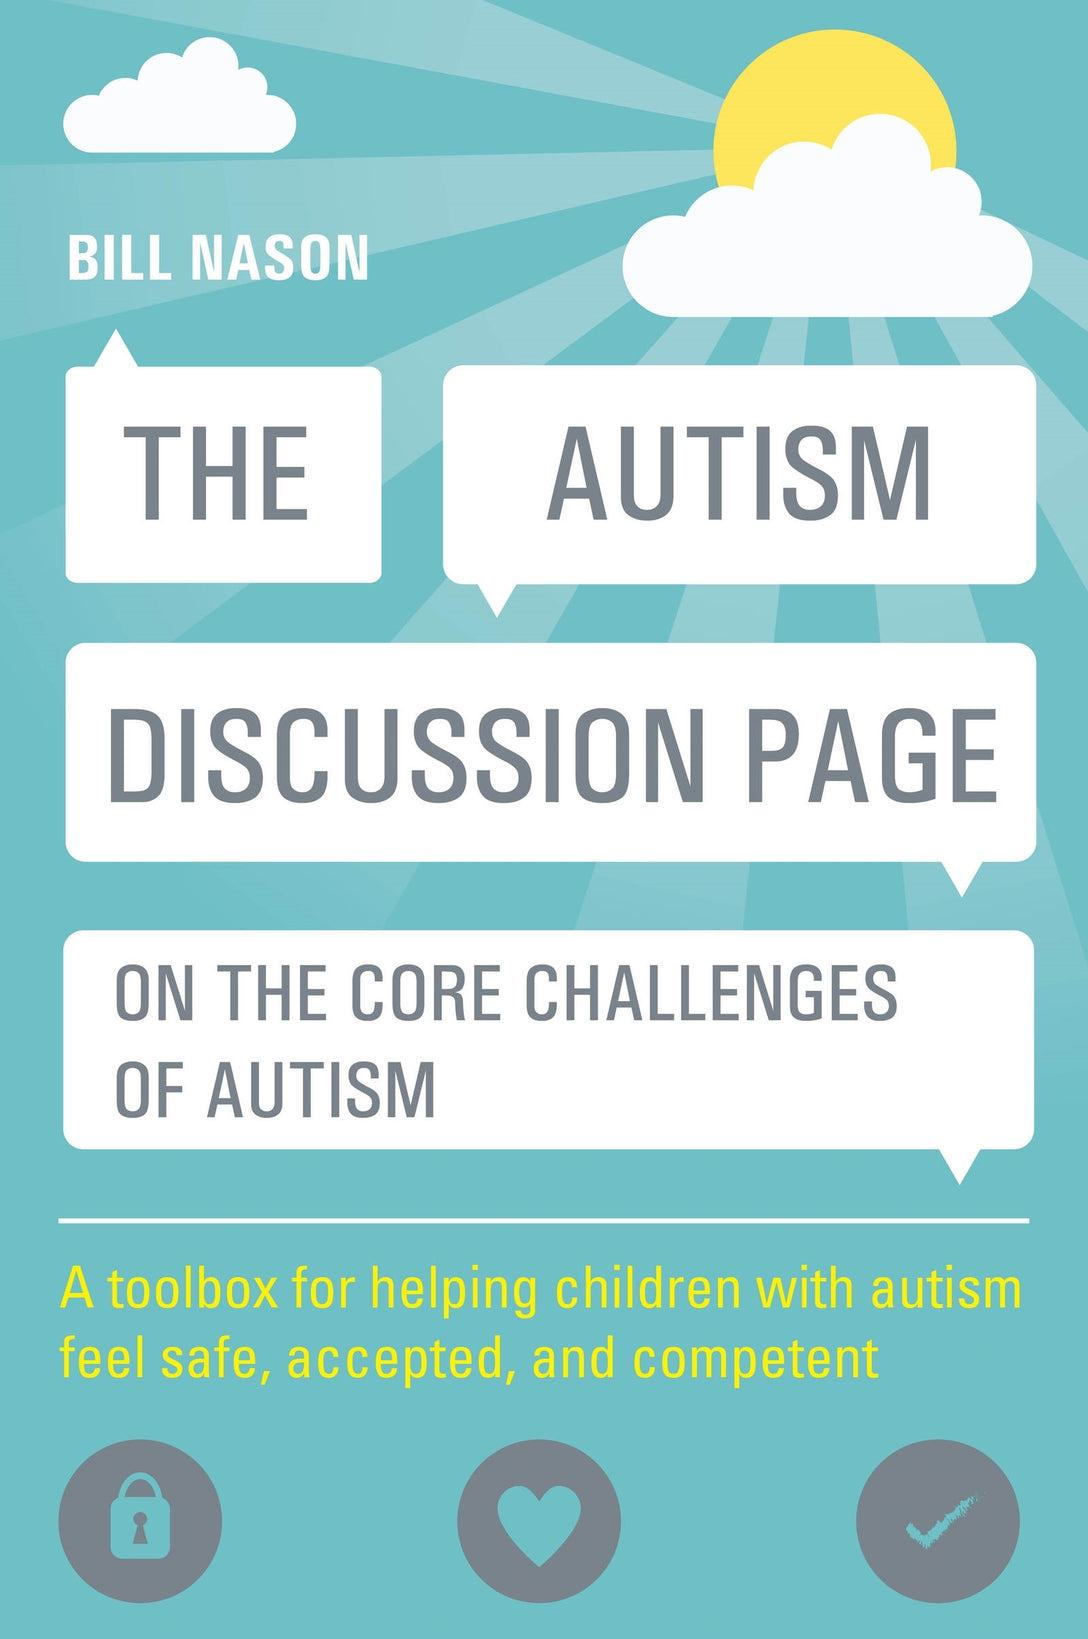 The Autism Discussion Page on the core challenges of autism by Bill Nason